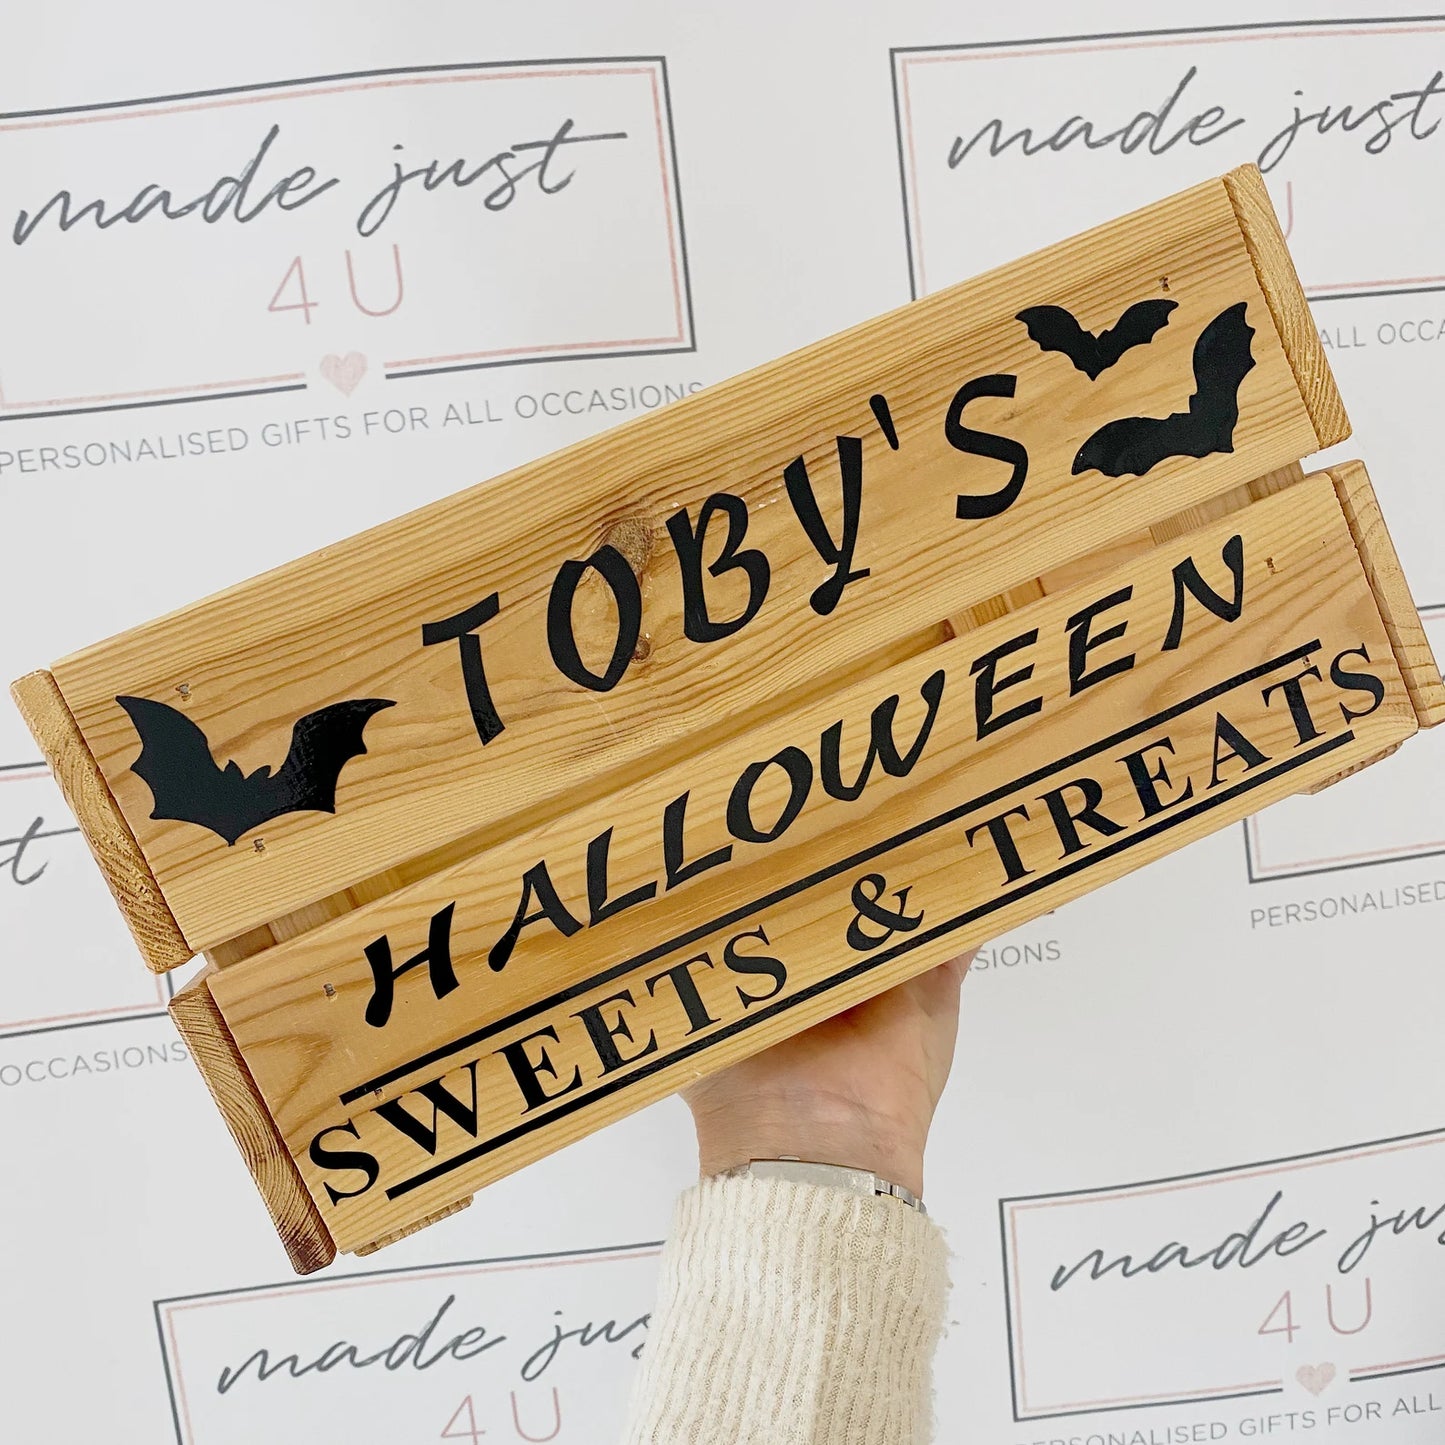 Personalised Bats and Witches Halloween Trick or Treat Hamper Gift Crate, Halloween gift crate Wooden Crate / Box, Trick or Treat Box